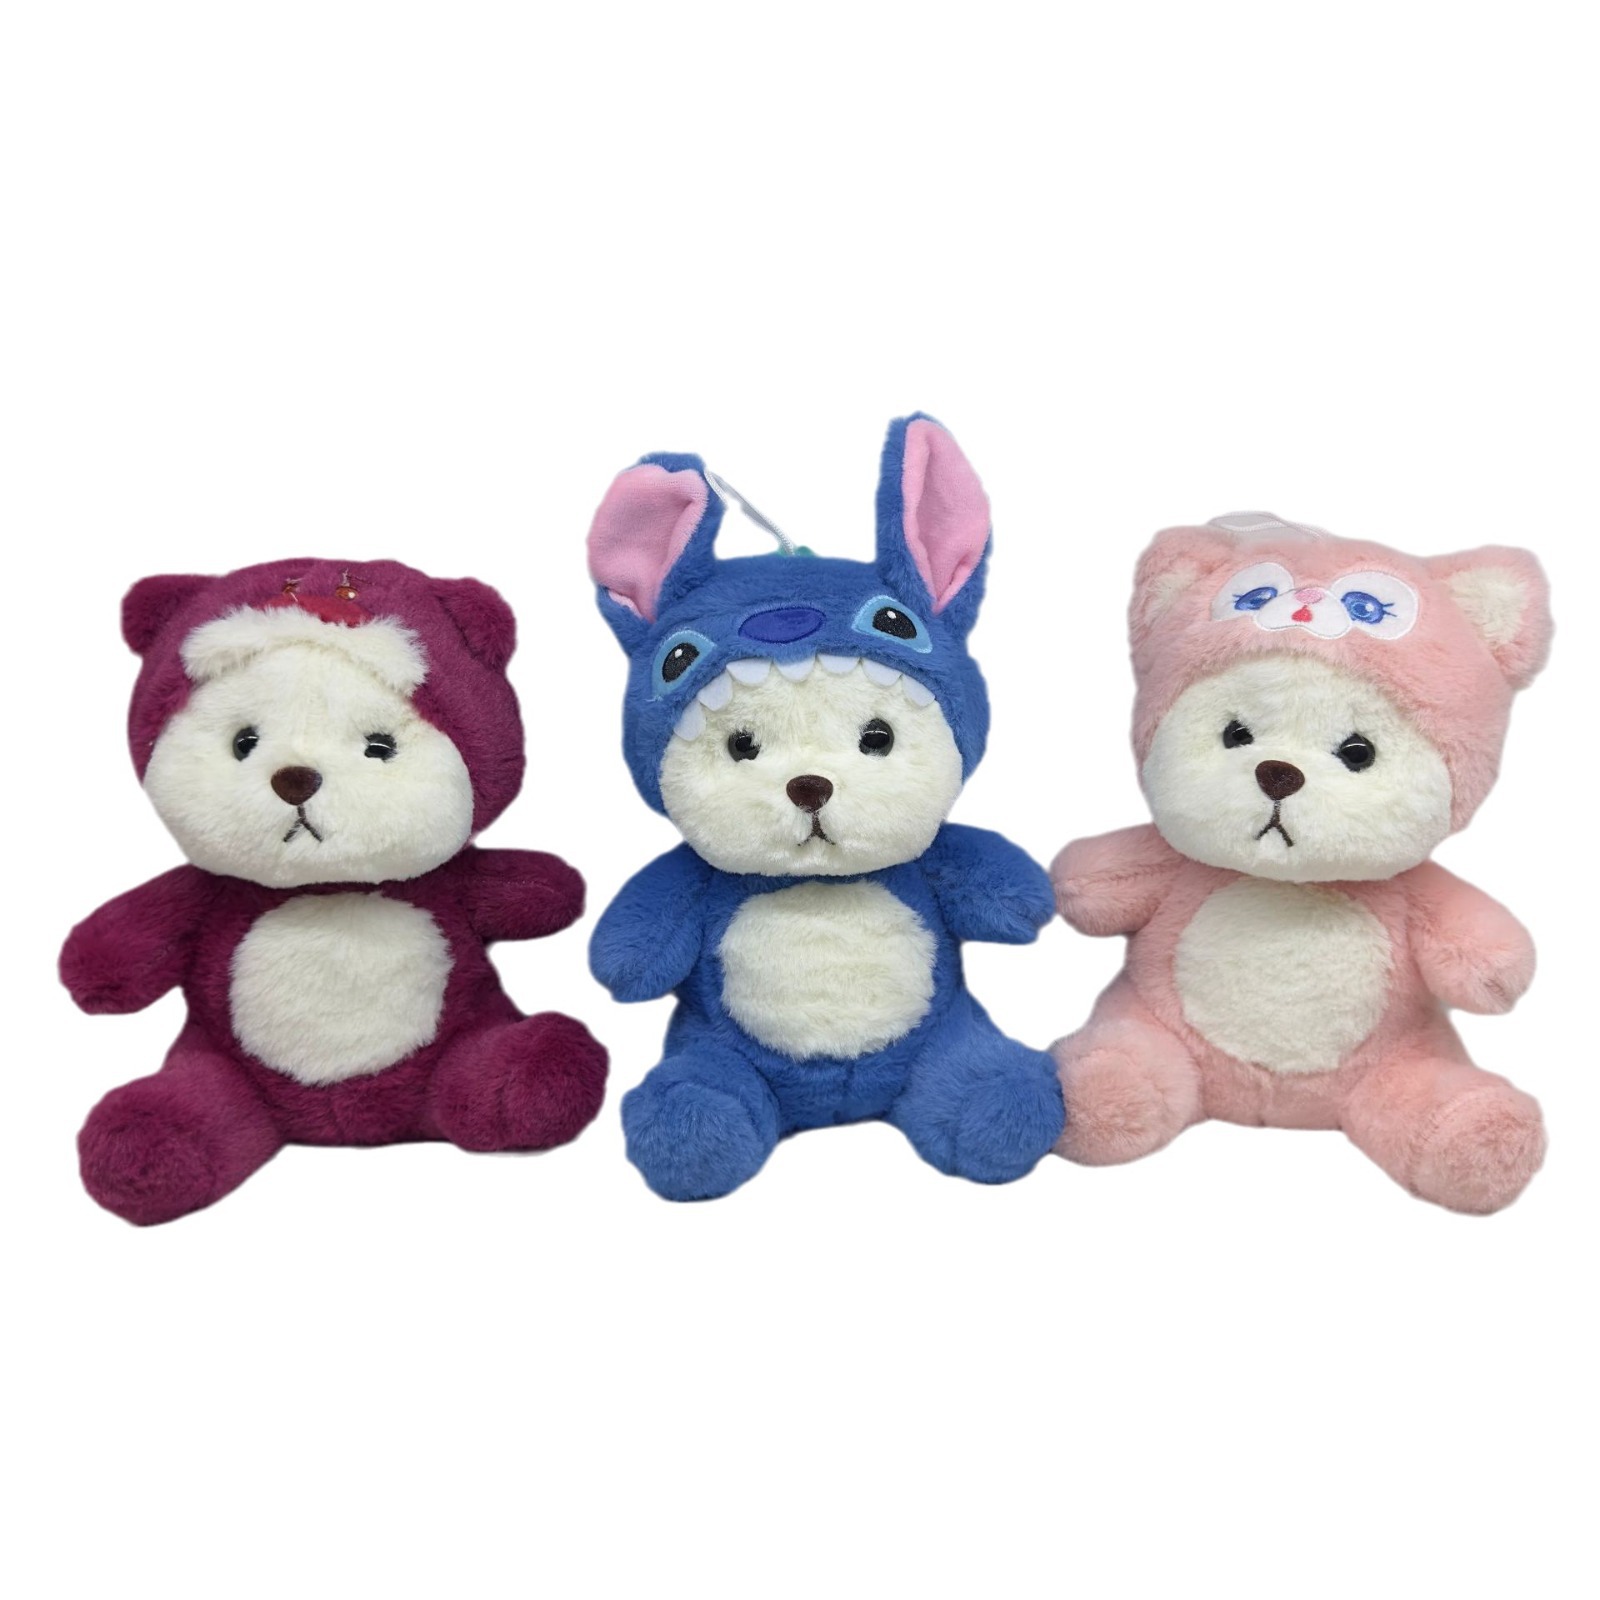 Plush Toy 8-Inch Crane Machines Prize Claw Doll Transformation Bear Doll Push Small Goods Company Annual Meeting Gifts